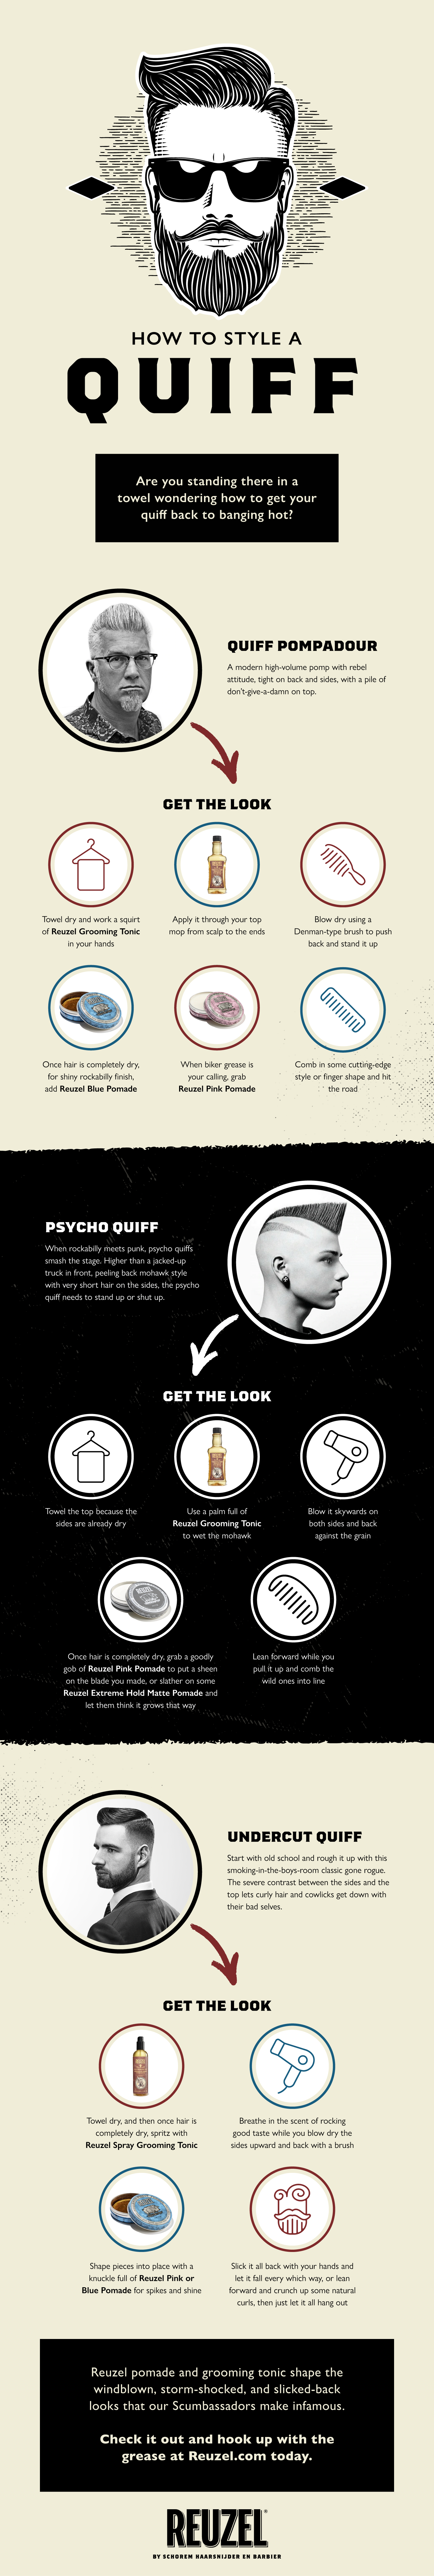 How to Style a Quiff Infographic